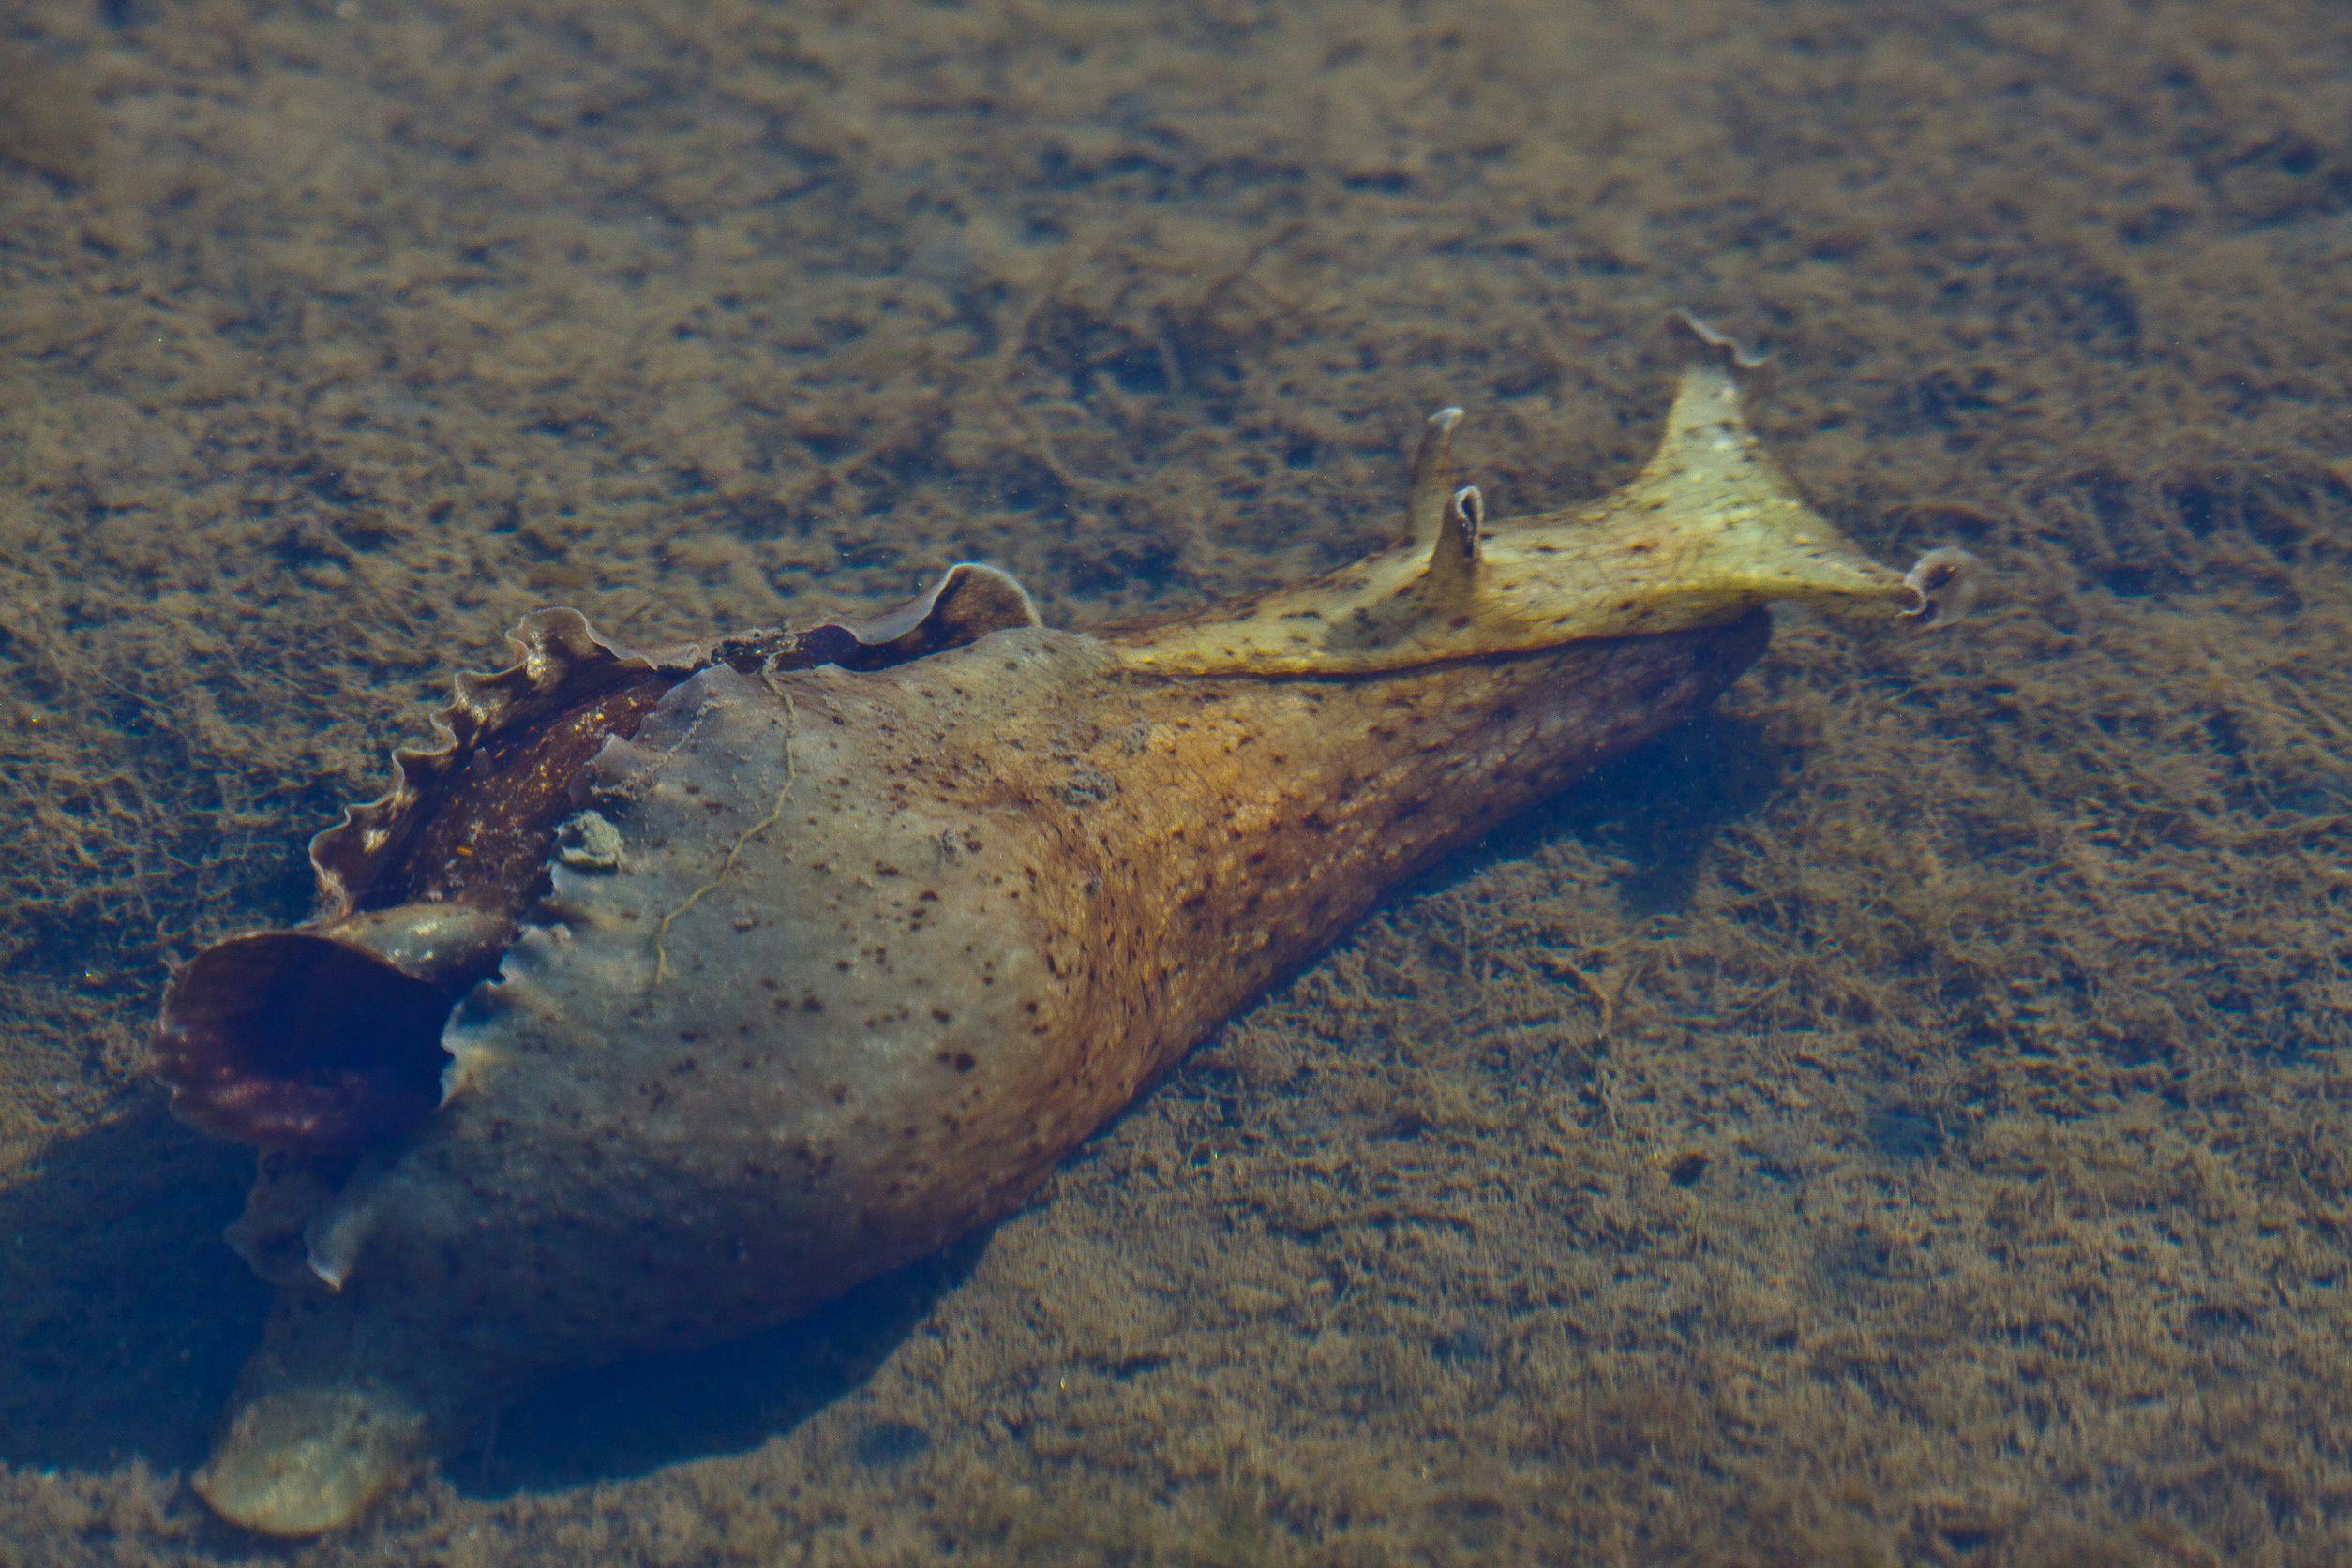 A wild California Sea Hare, Aplysia californica, a hermaphroditic species commonly used in laboratory research | Image Credit: © elharo - stock.adobe.com